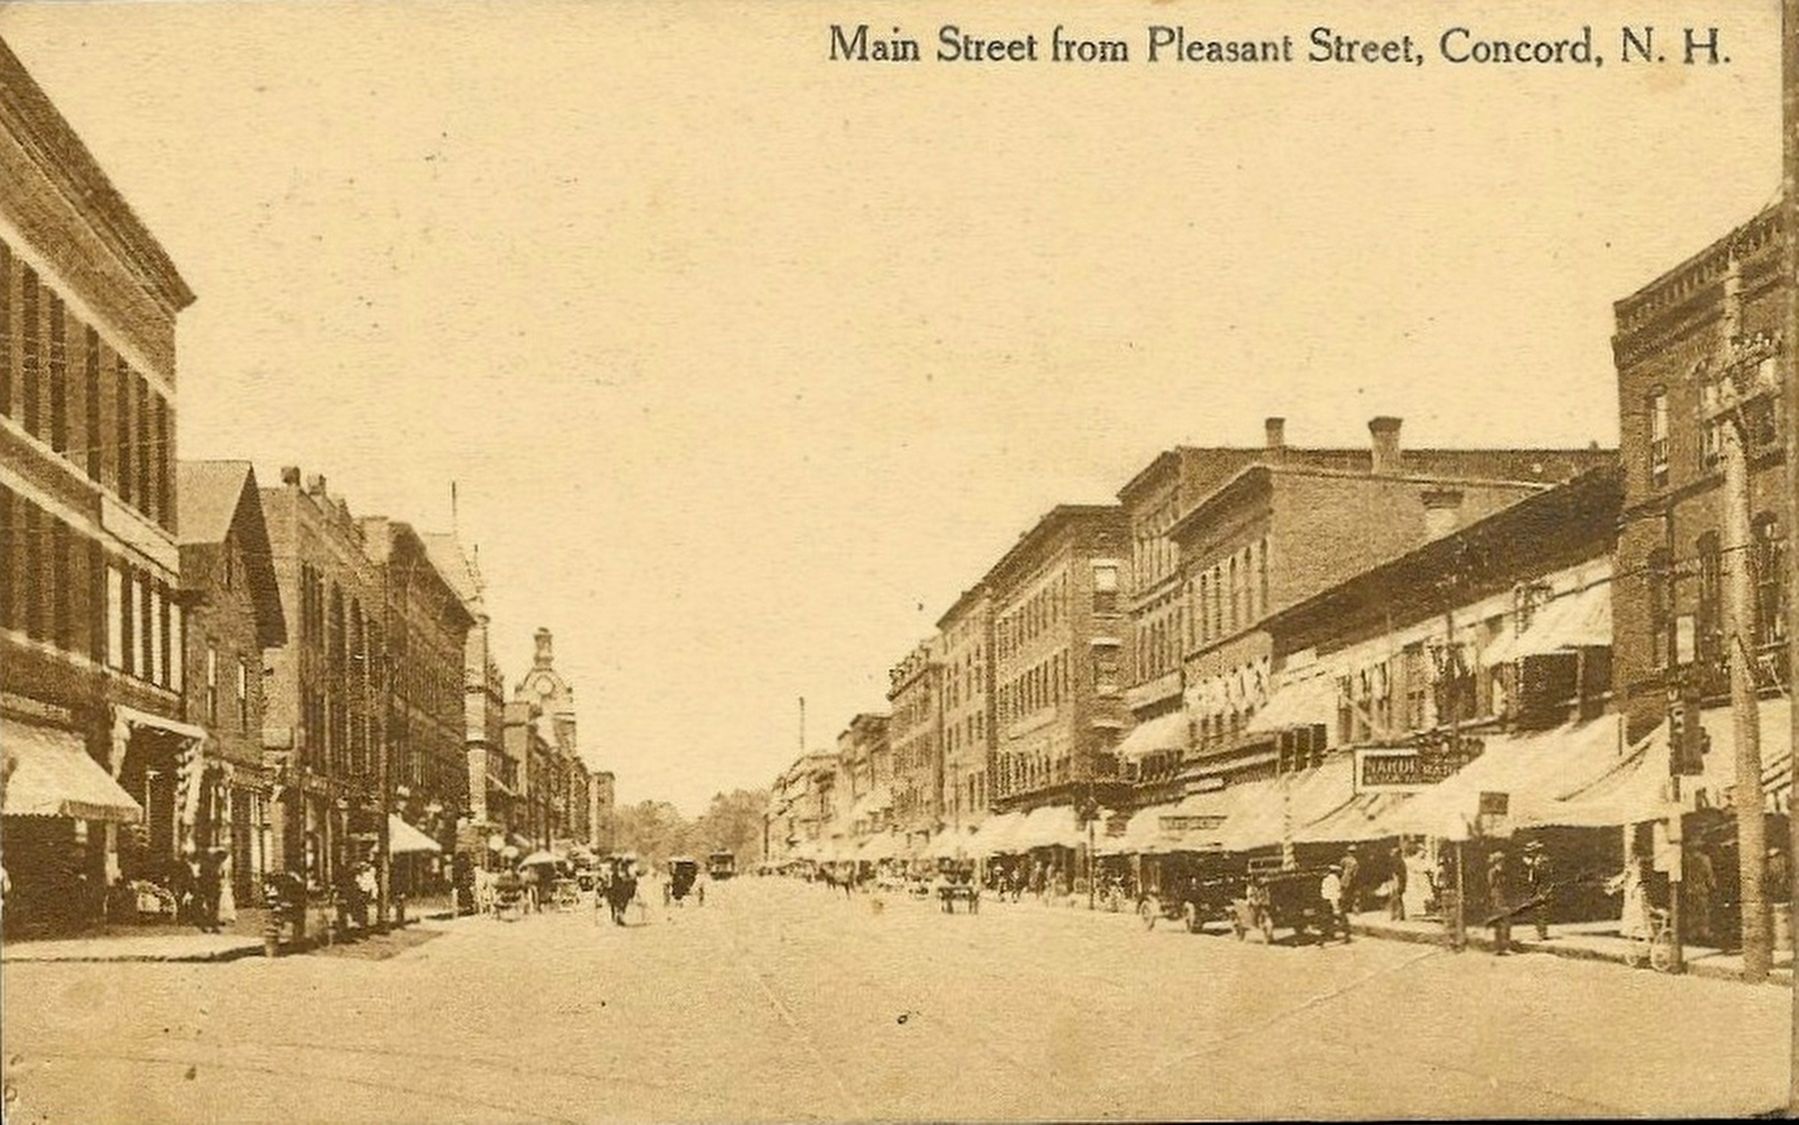 <i>Main Street from Pleasant Street, Concord, N.H.</i> image. Click for full size.